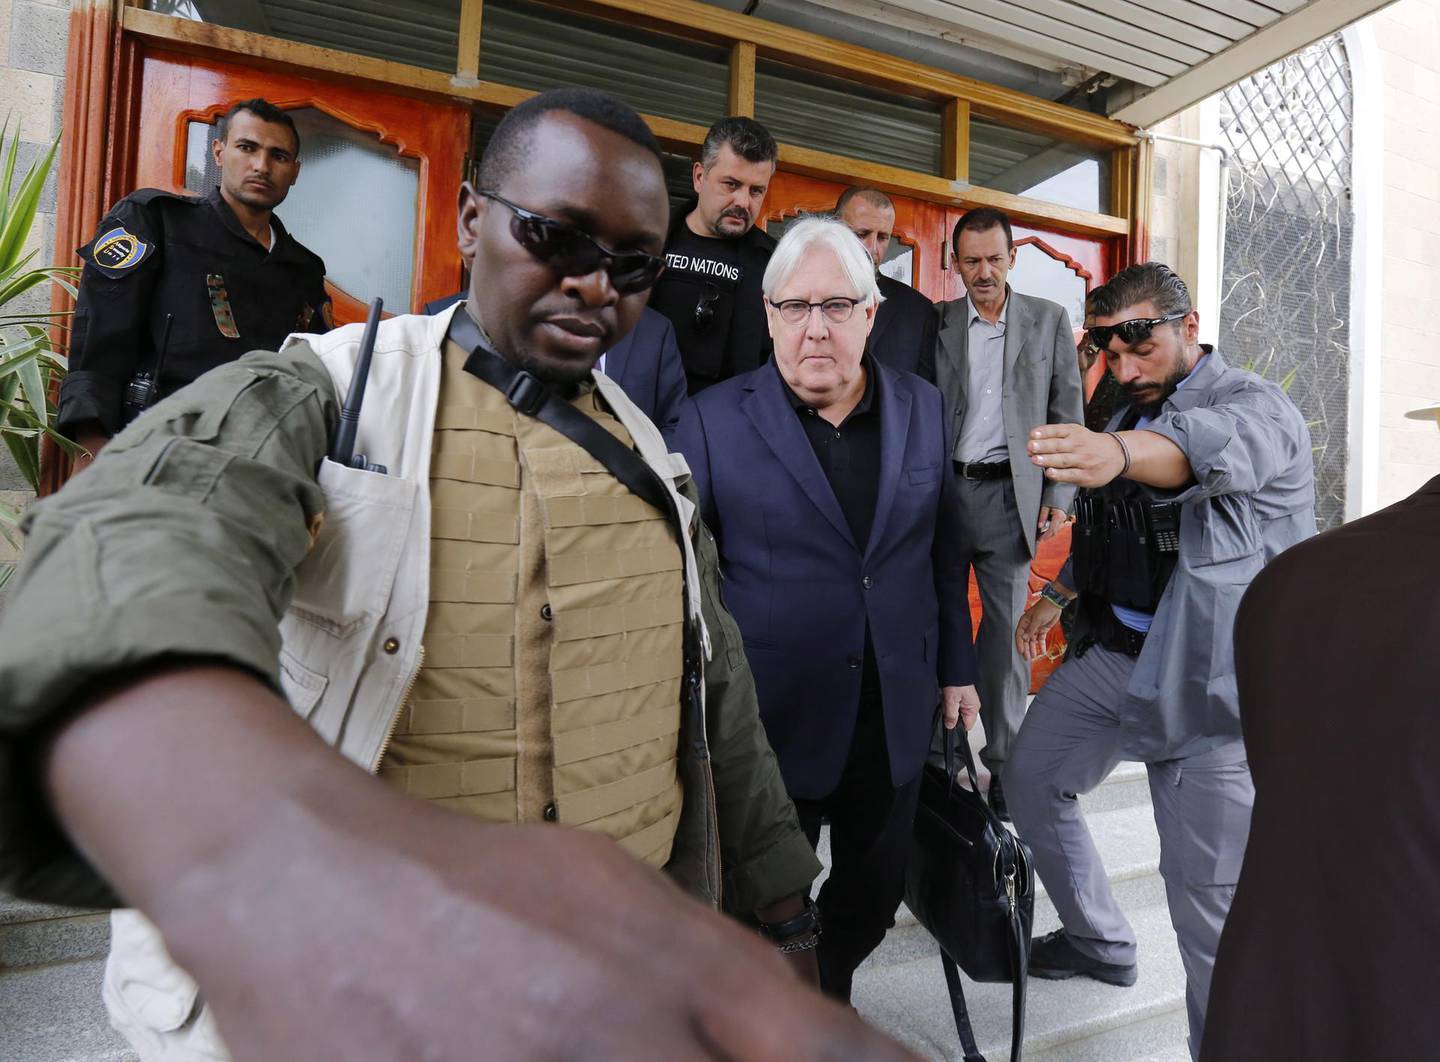 epa06812660 Bodyguards escort UN Special Envoy to Yemen Martin Griffiths (C) upon his arrival in Sana'a, Yemen, 16 June 2018. According to reports, UN Special Envoy to Yemen Martin Griffiths arrived in Sana'a for talks with Houthi representatives on the western port of Hodeida where Yemeni government forces backed by the Saudi-led coalition are battling Houthi rebels.  EPA/YAHYA ARHAB